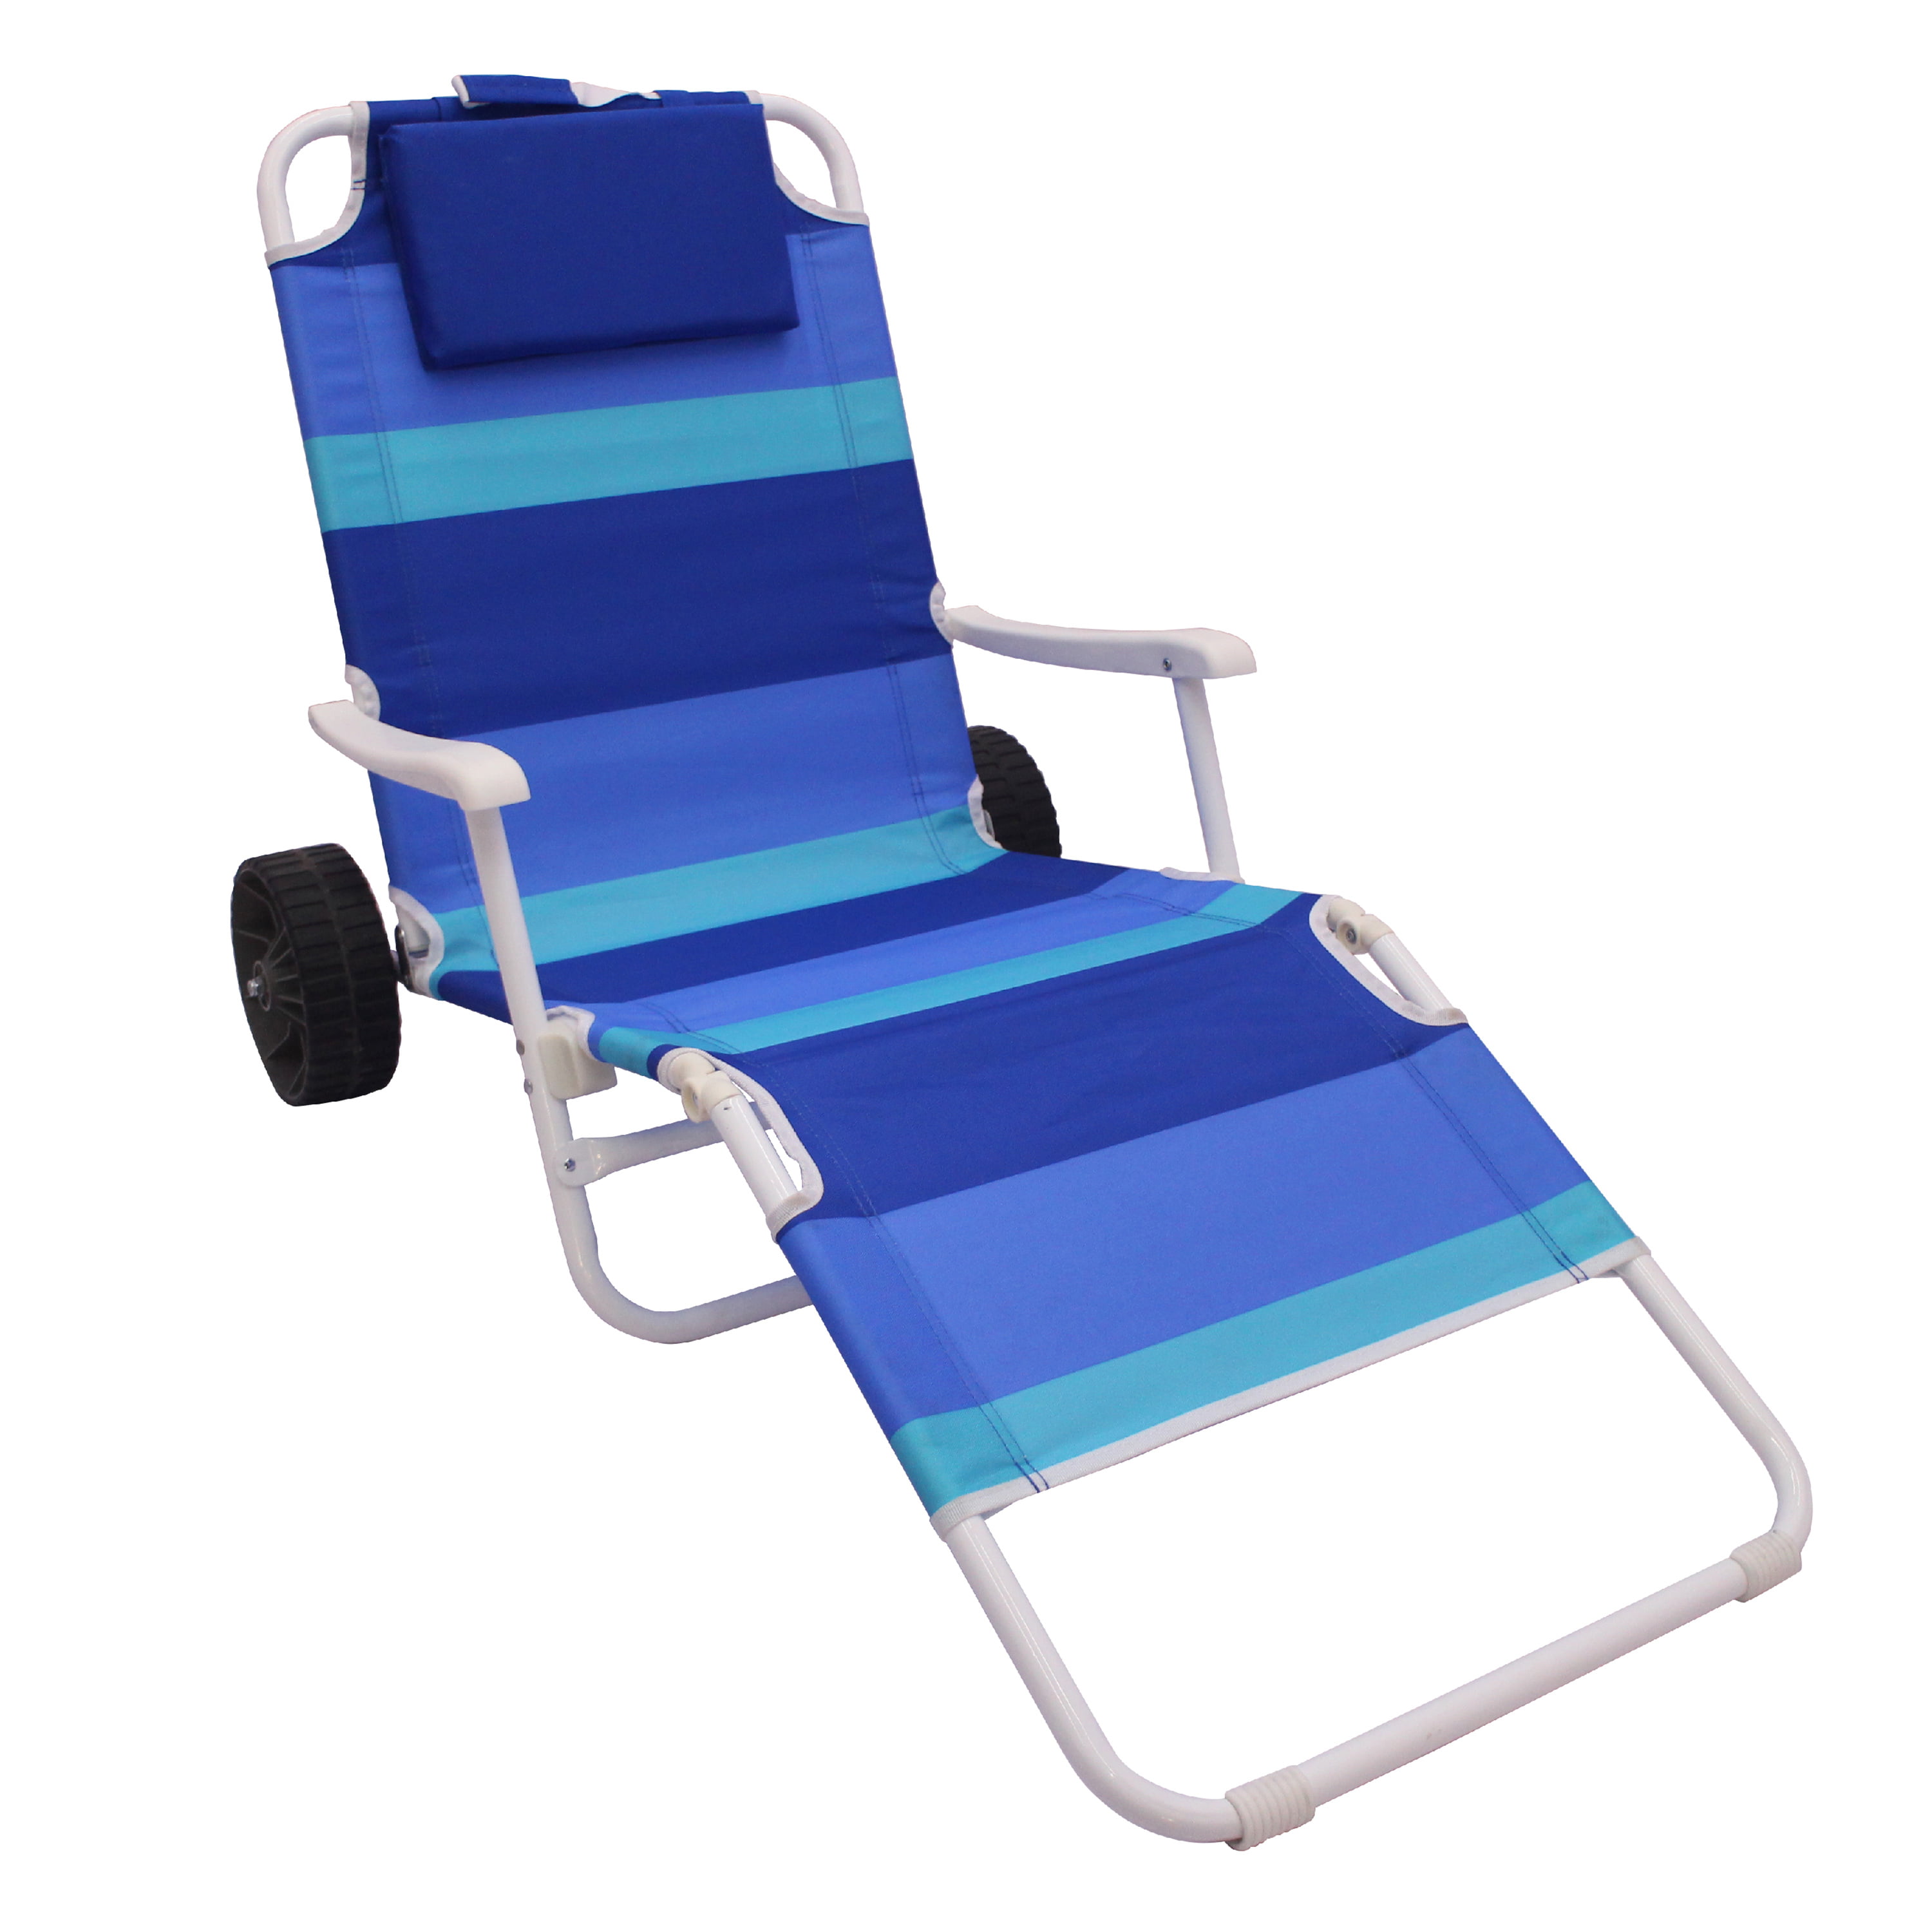 Details about   Mainstays Folding Beach Chair with Carry Bag Blue 2 pack free shipping USA 